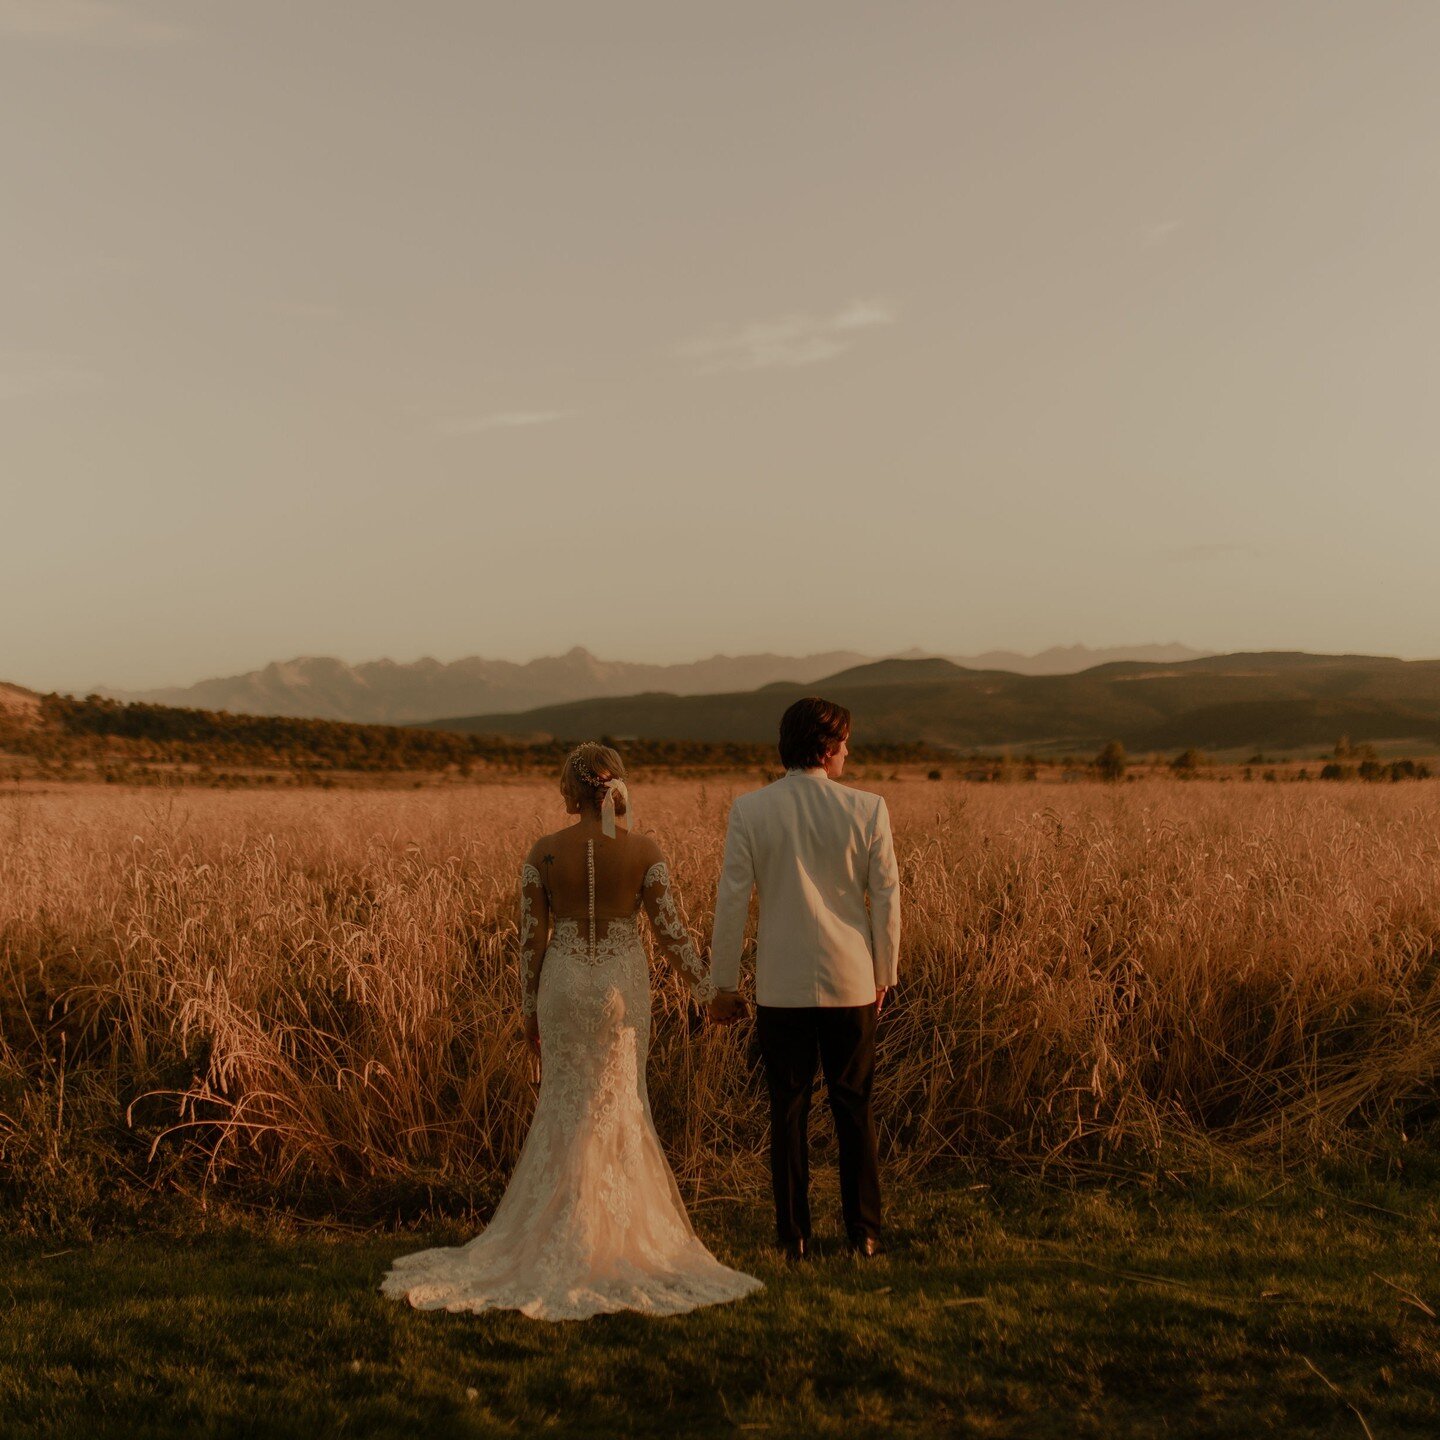 From the moment we met Brooke &amp; Gavin their love was contagious. And that love spilled over into every detail of their wedding when so many of their family and friends stepped in to help make their wedding day perfect. Photos don't show the time 